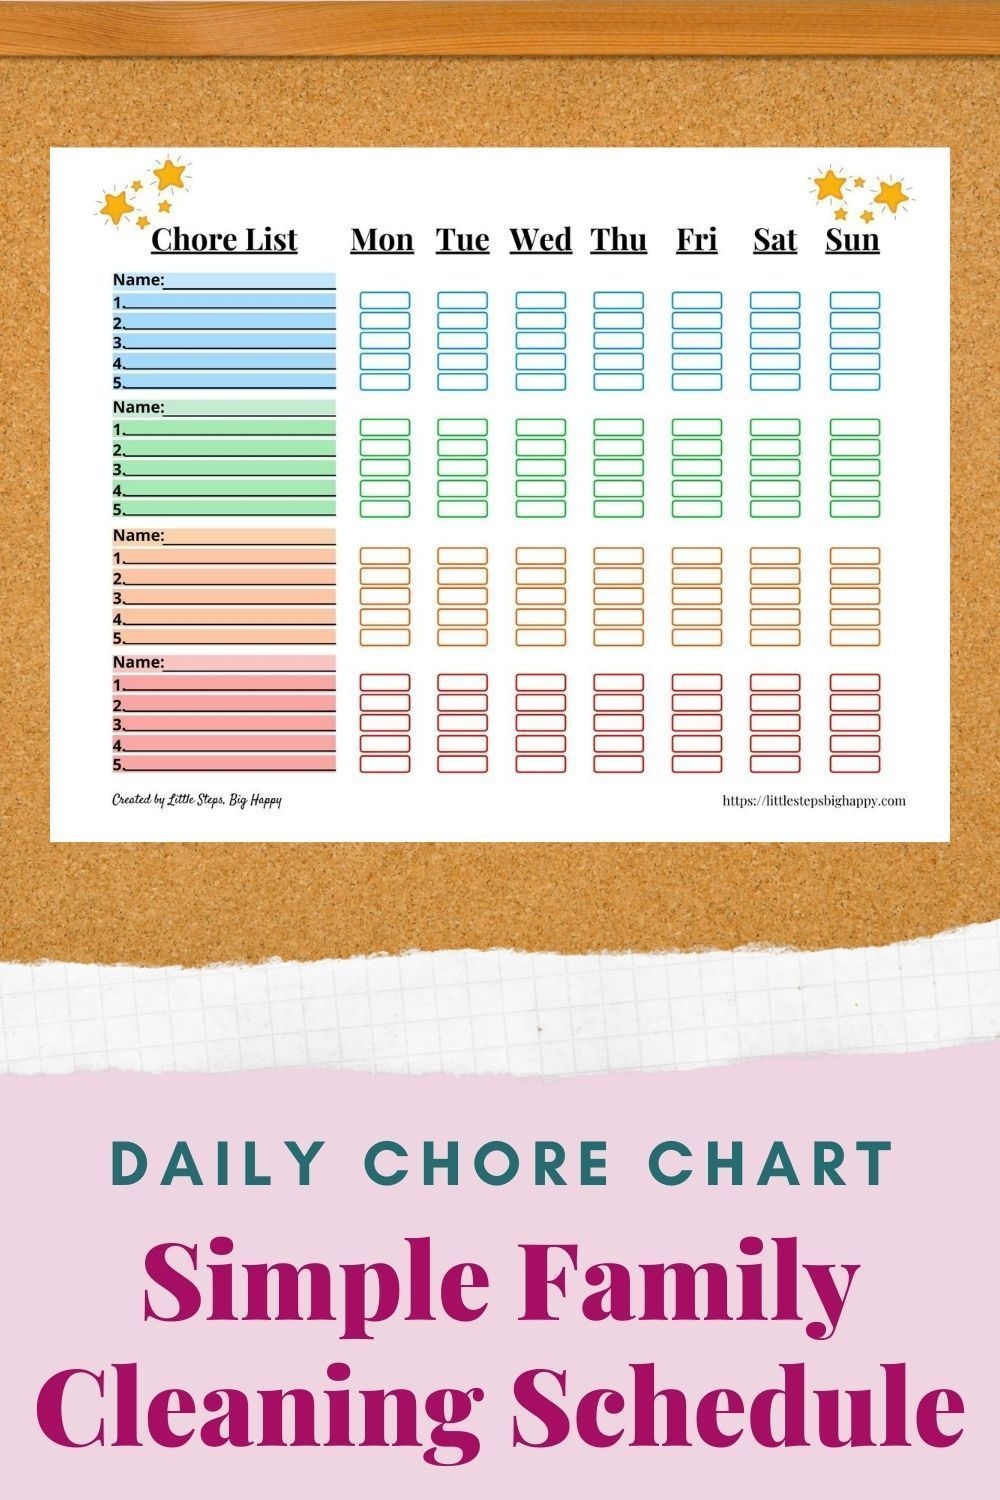 Weekly Chore Chart For 4 Kids Printable Chore List Multiple Kids Customizable Chore List Sticker Chart Toddlers Preschoolers Etsy Chore Chart Chore Chart Kids Family Chore Charts - Free Printable Chore Charts For Multiple Children